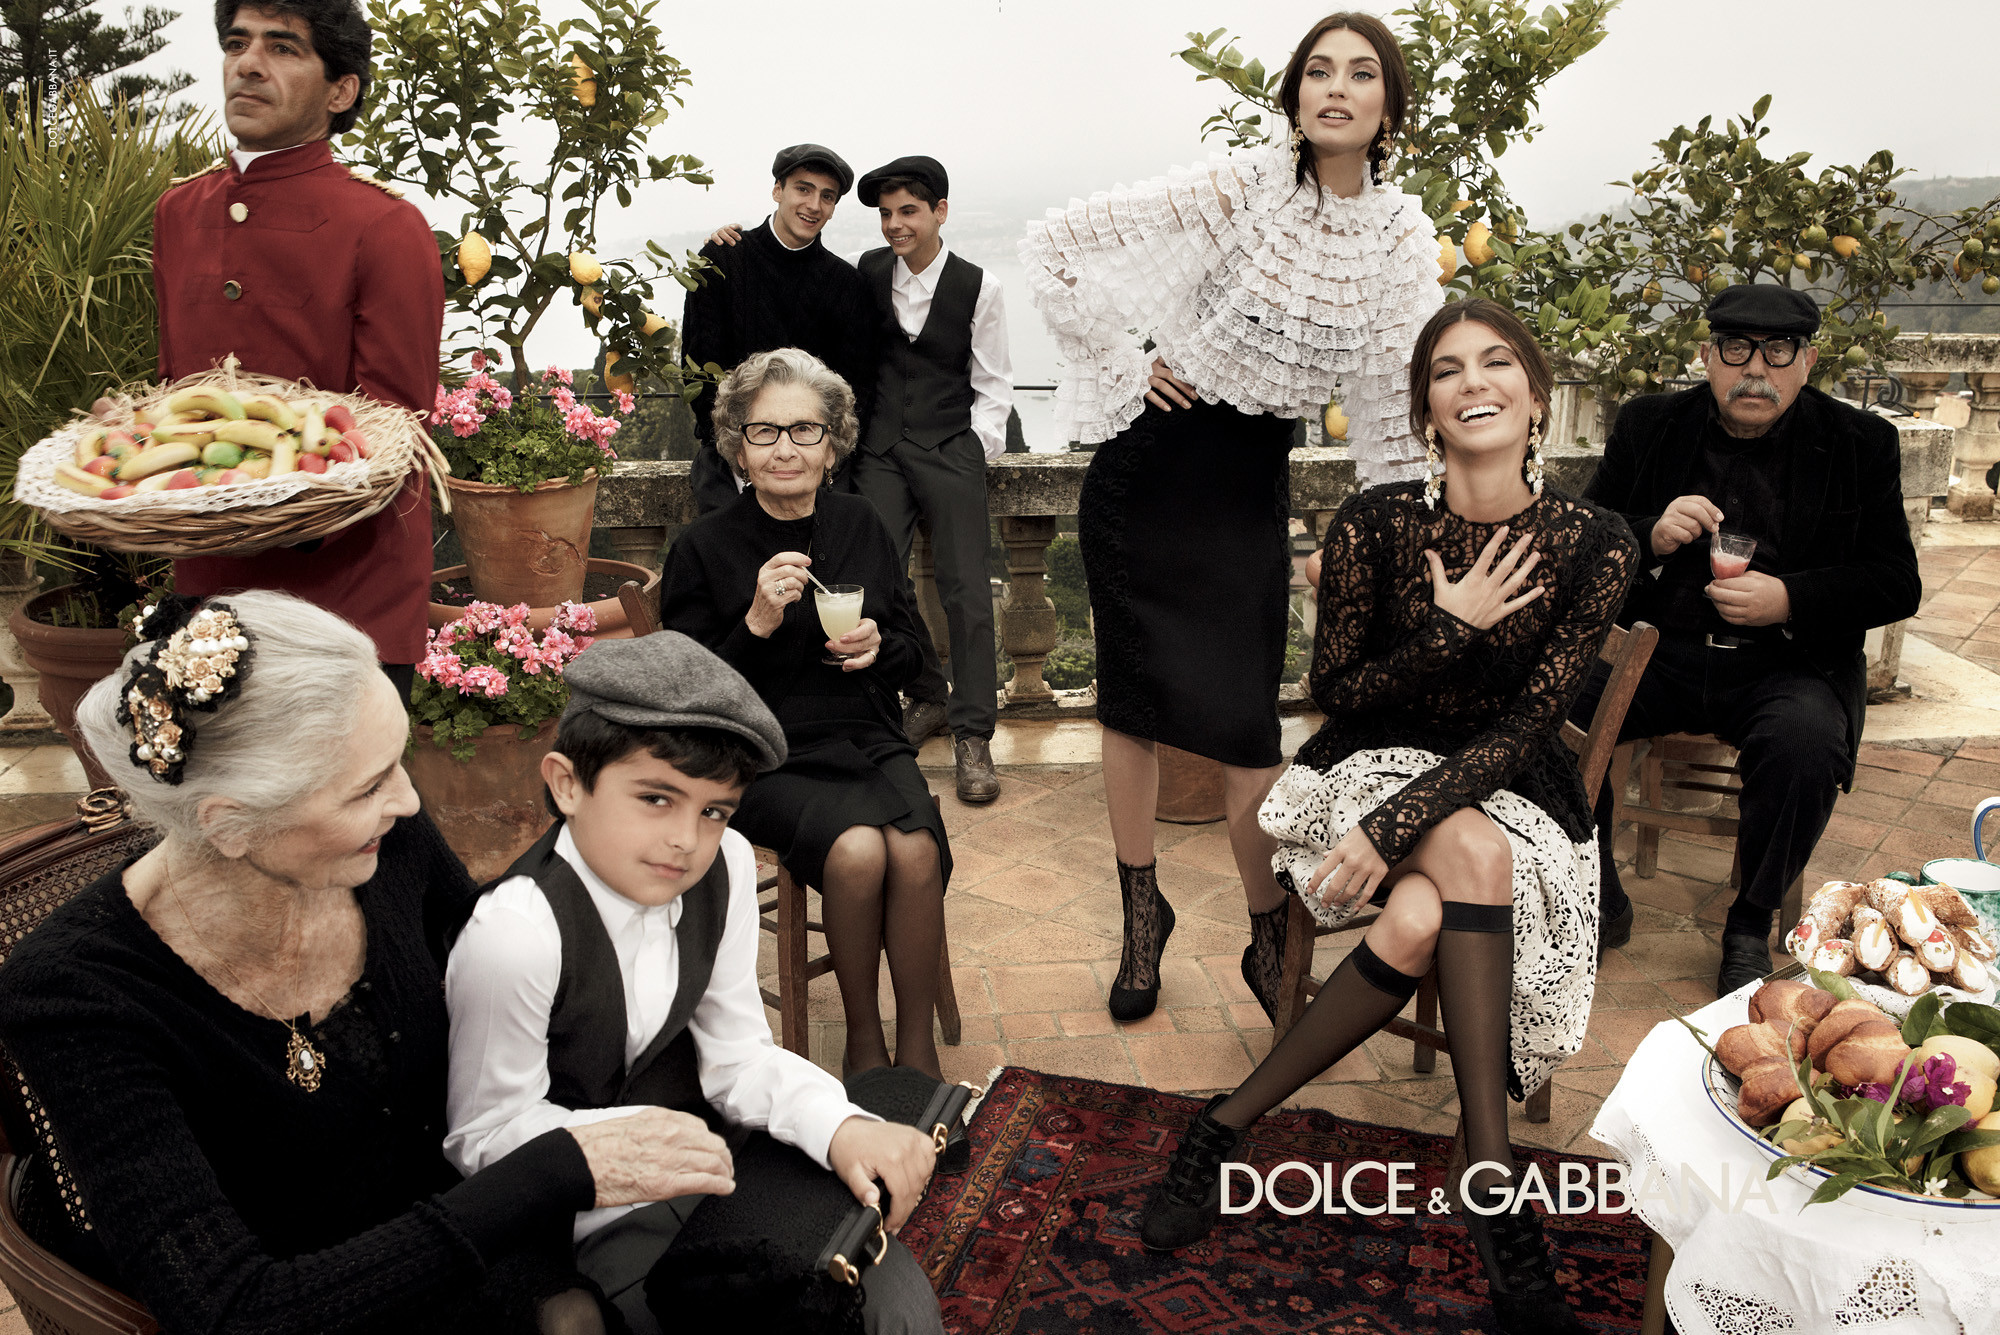 1000 Images About Dolce And Gabbana 2000x1335